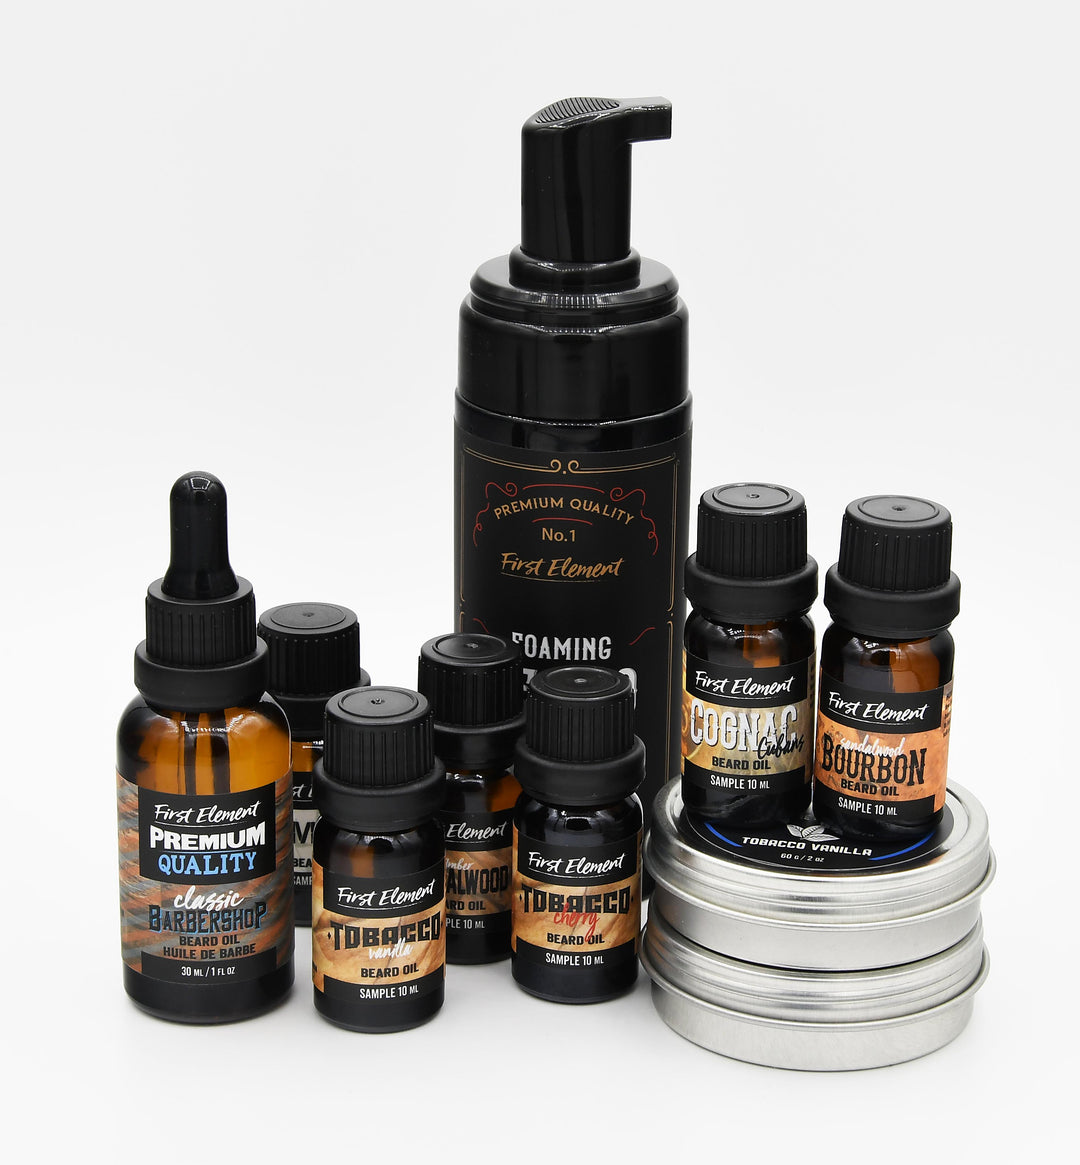 Beard Care Sample Kit includes;  1 - 30ml Beard Oil of the scent selected - Amber Glass Bottle with a Glass Pipette Dropper. (unscented unless otherwise requested in notes for another) 13 - 10ml Beard Oils - Tester Bottles - One of each scent that we offer.  1 - 2oz Beard Balm (unscented unless otherwise requested in notes for another) 1 150ml Foaming Beard Wash (unscented unless otherwise requested in notes for another) 1 - 2oz Beard Butter  Unscented